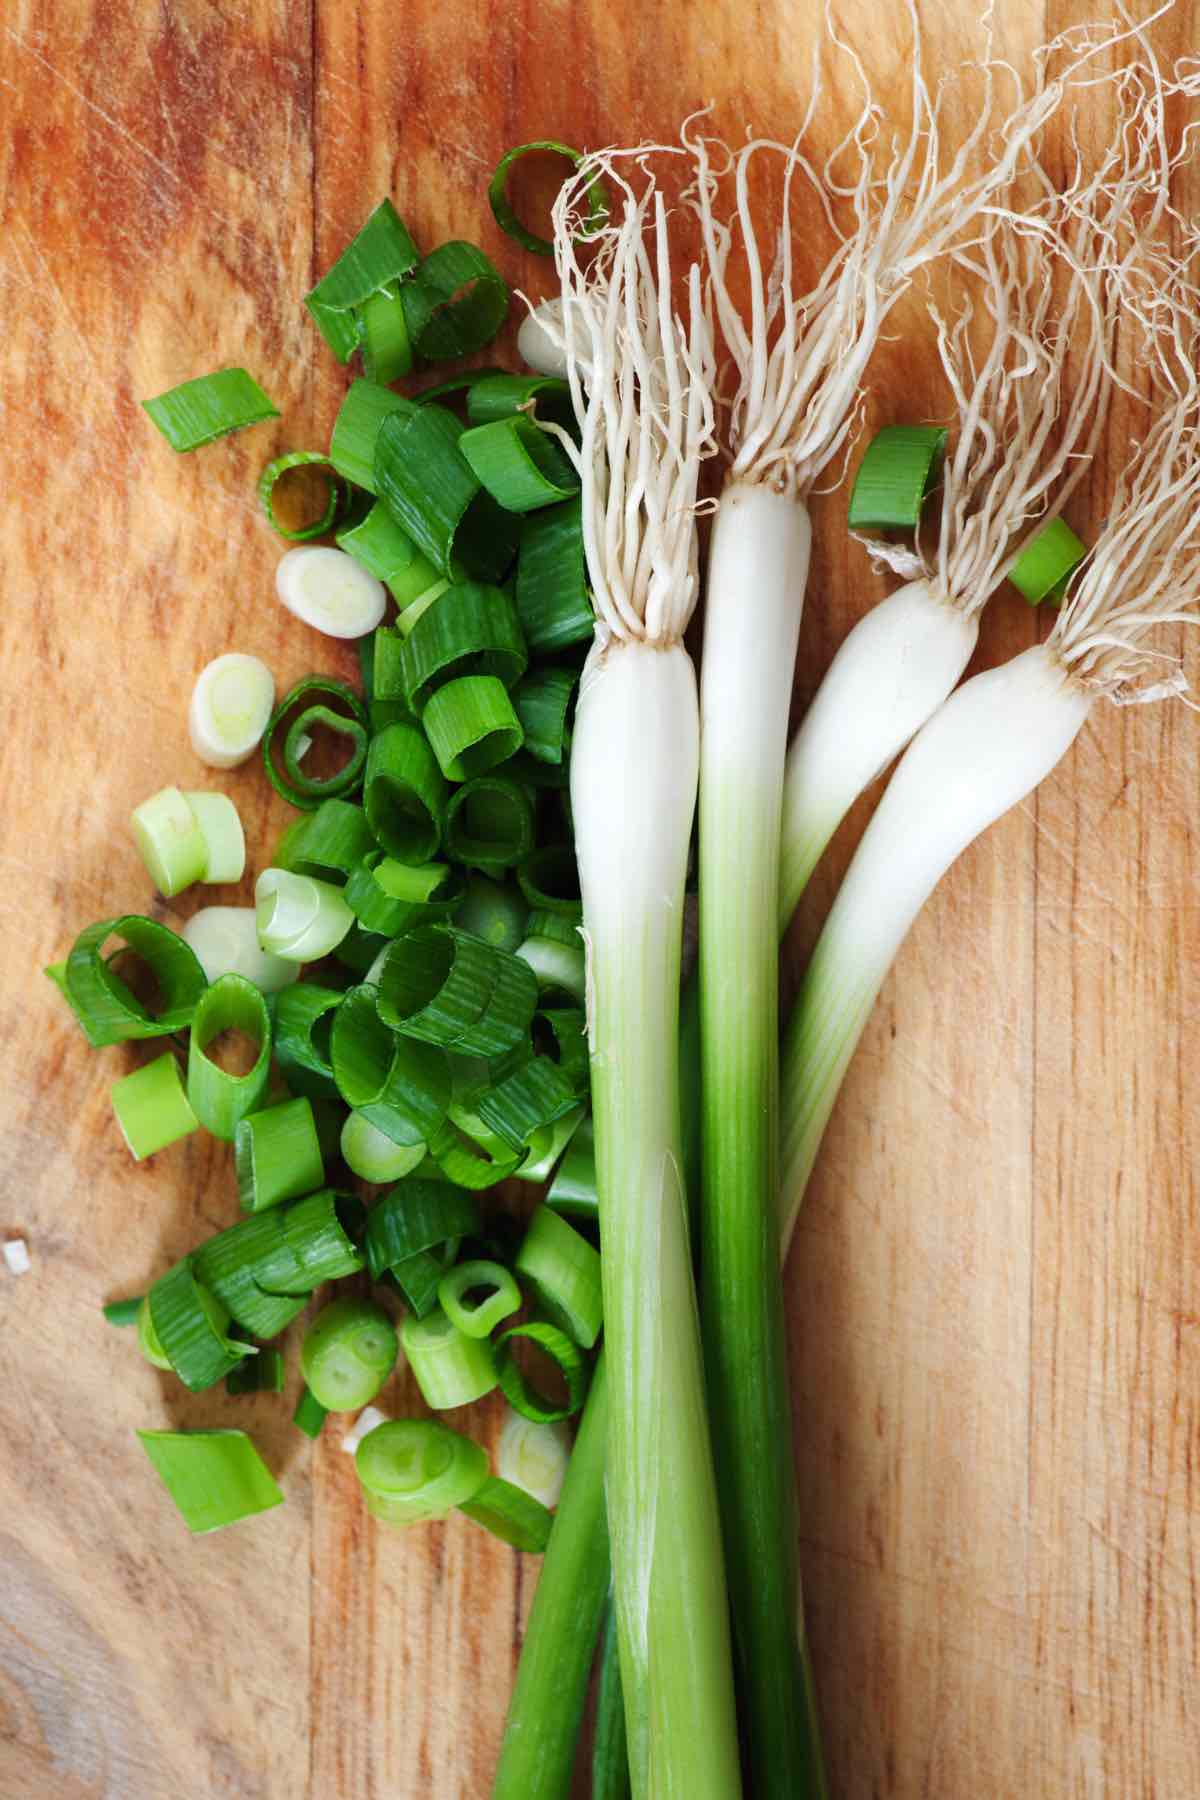 Depending on how you’re using your green onions, they can be cut into varying lengths and shapes. Here’s a simple, step-by-step guide to cutting green onions.